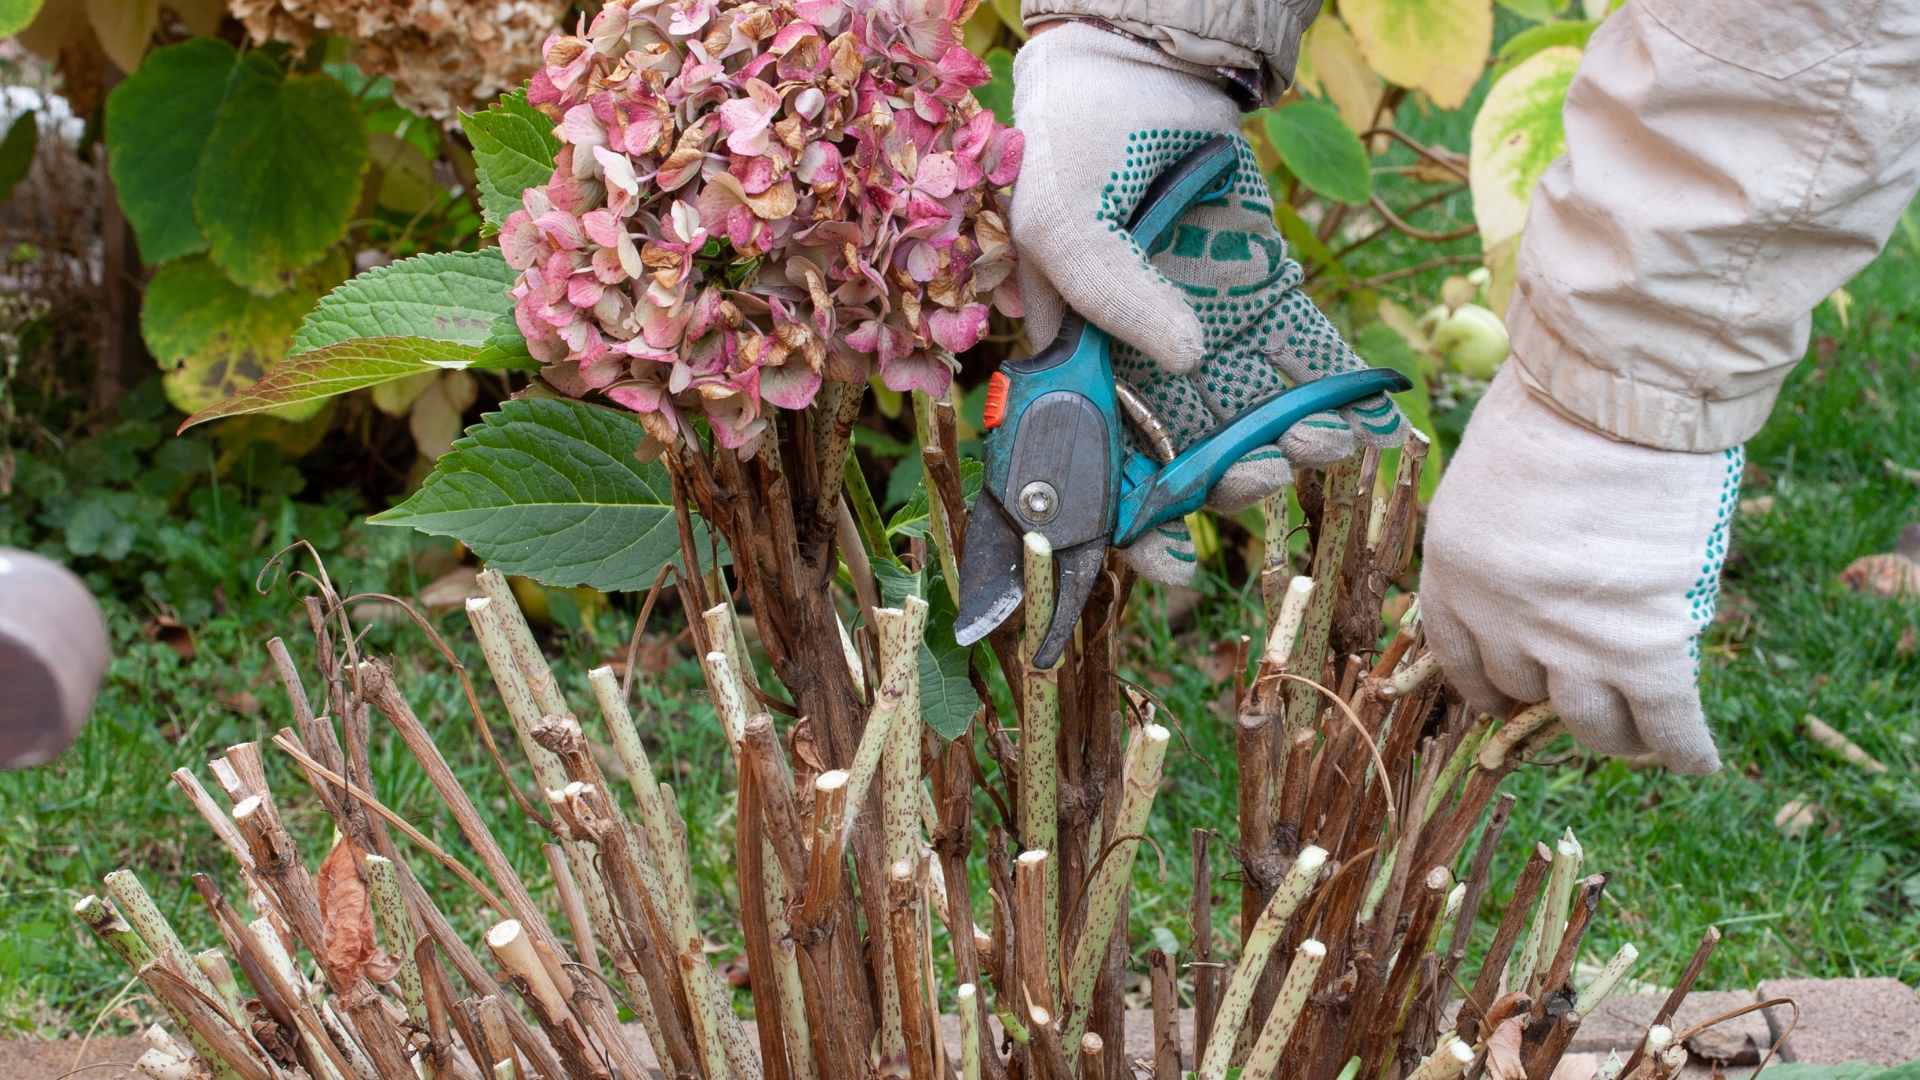 Follow These Pro Tips For Pruning Hydrangeas And Get More Captivating Blossoms